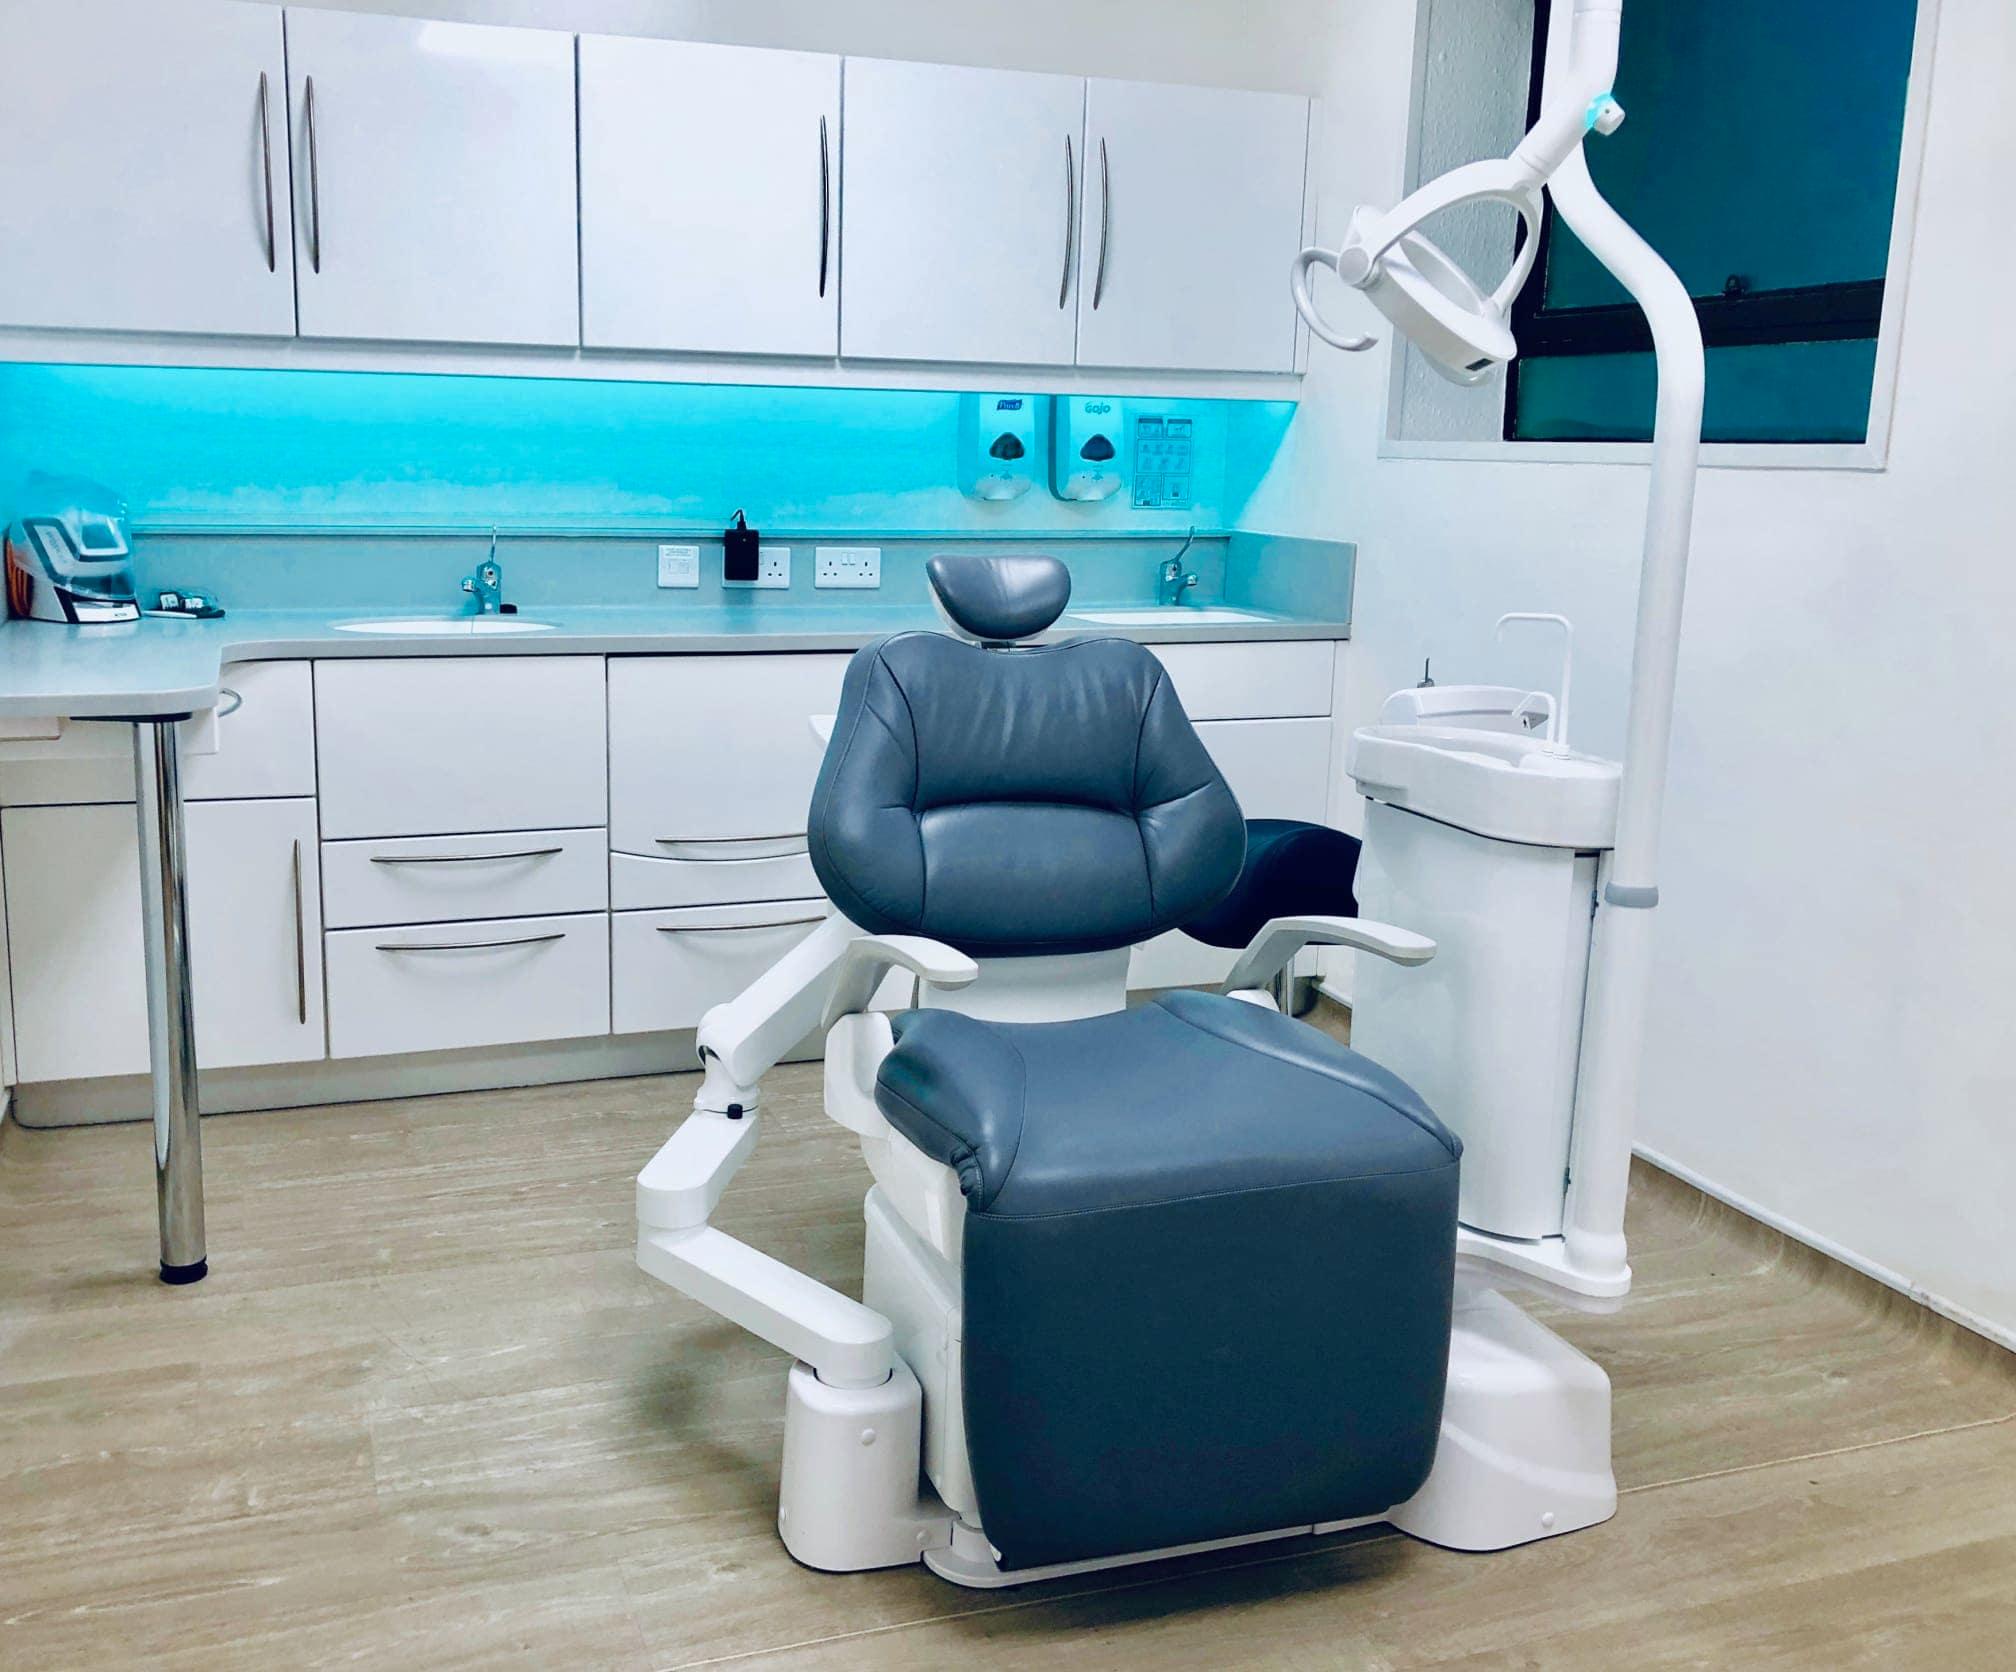 Images Better Care Clinic - Dental Practice